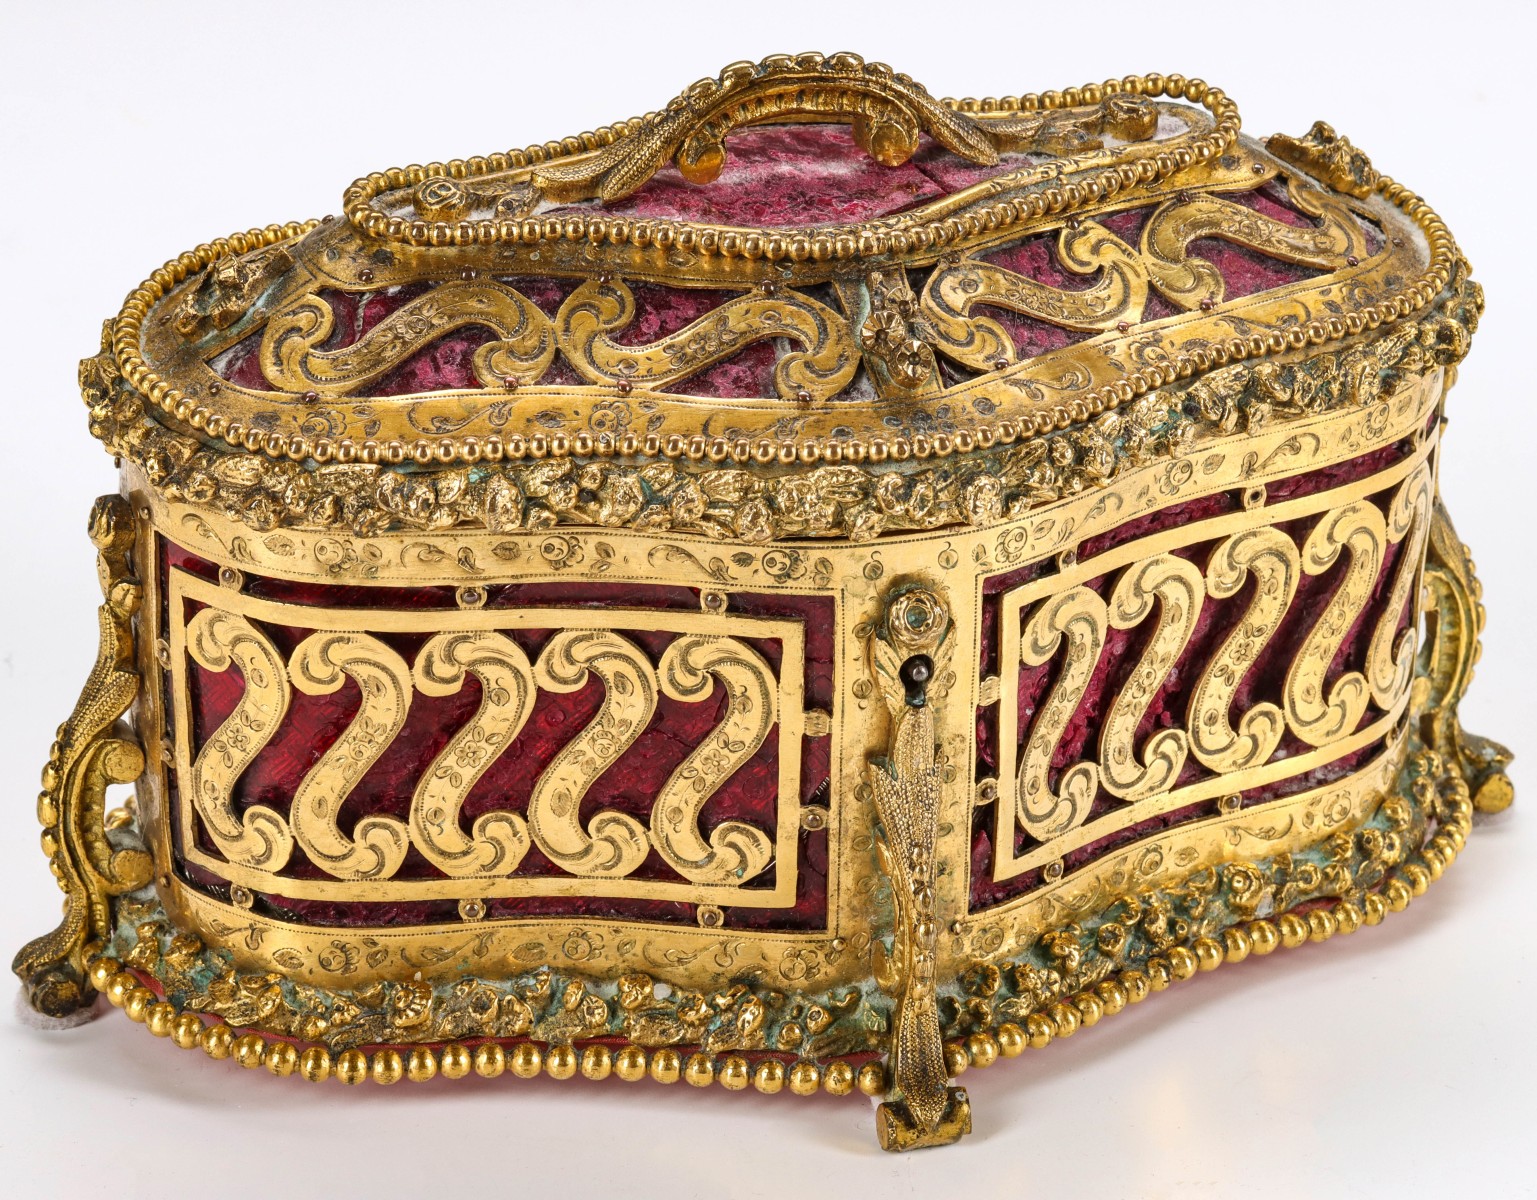 A MID 20TH C. BRASS CASKET WITH HAND ENGRAVED DETAIL